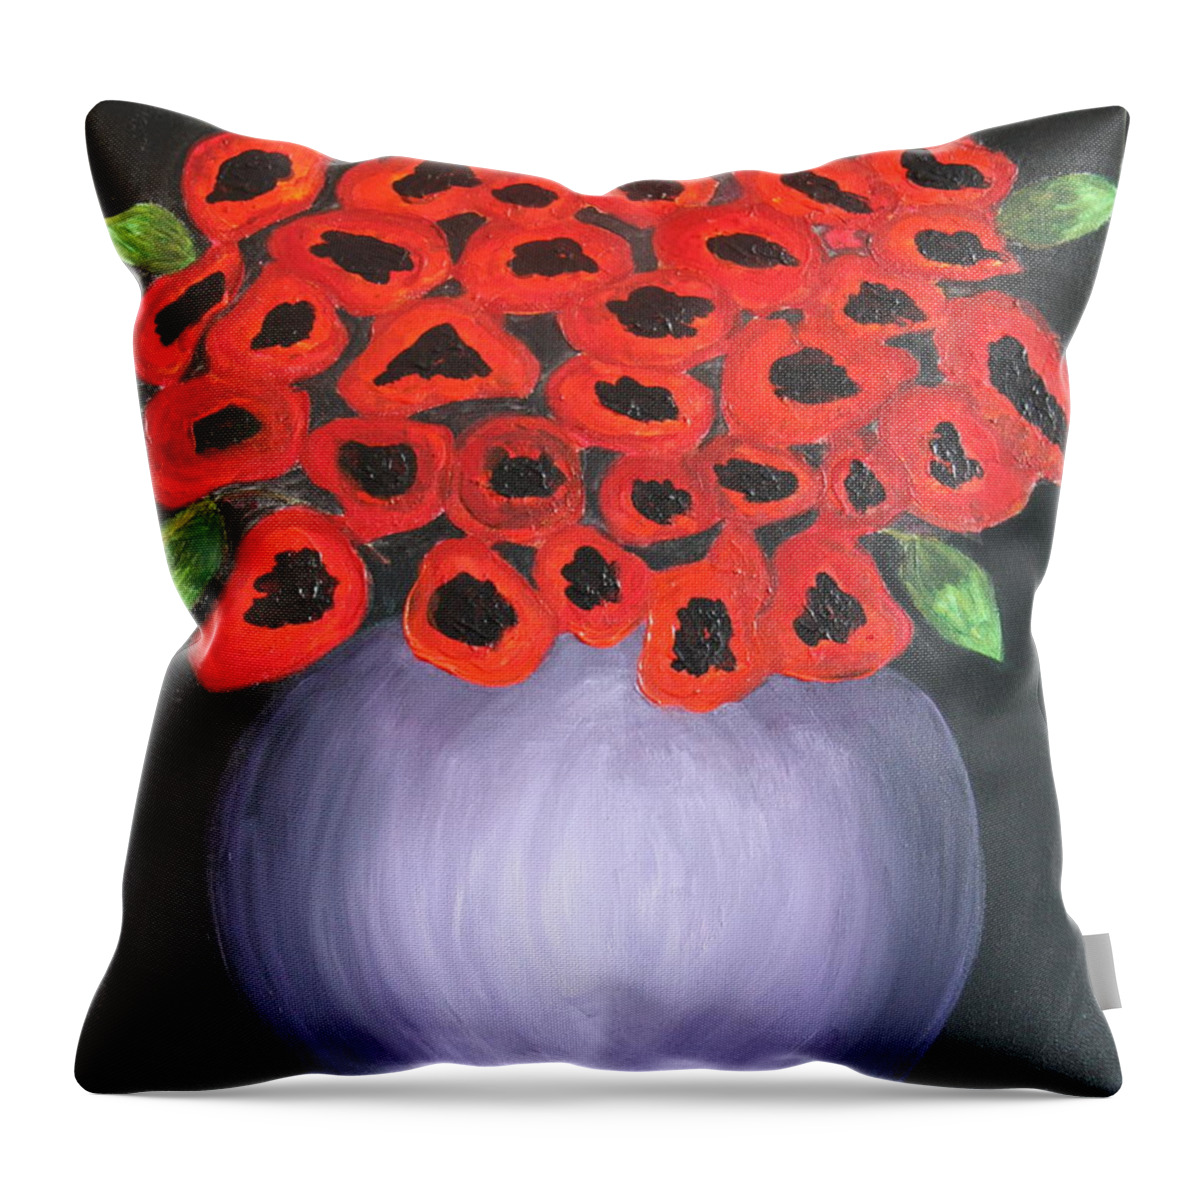 Abstract Throw Pillow featuring the painting Red Poppies by Jolanta Anna Karolska